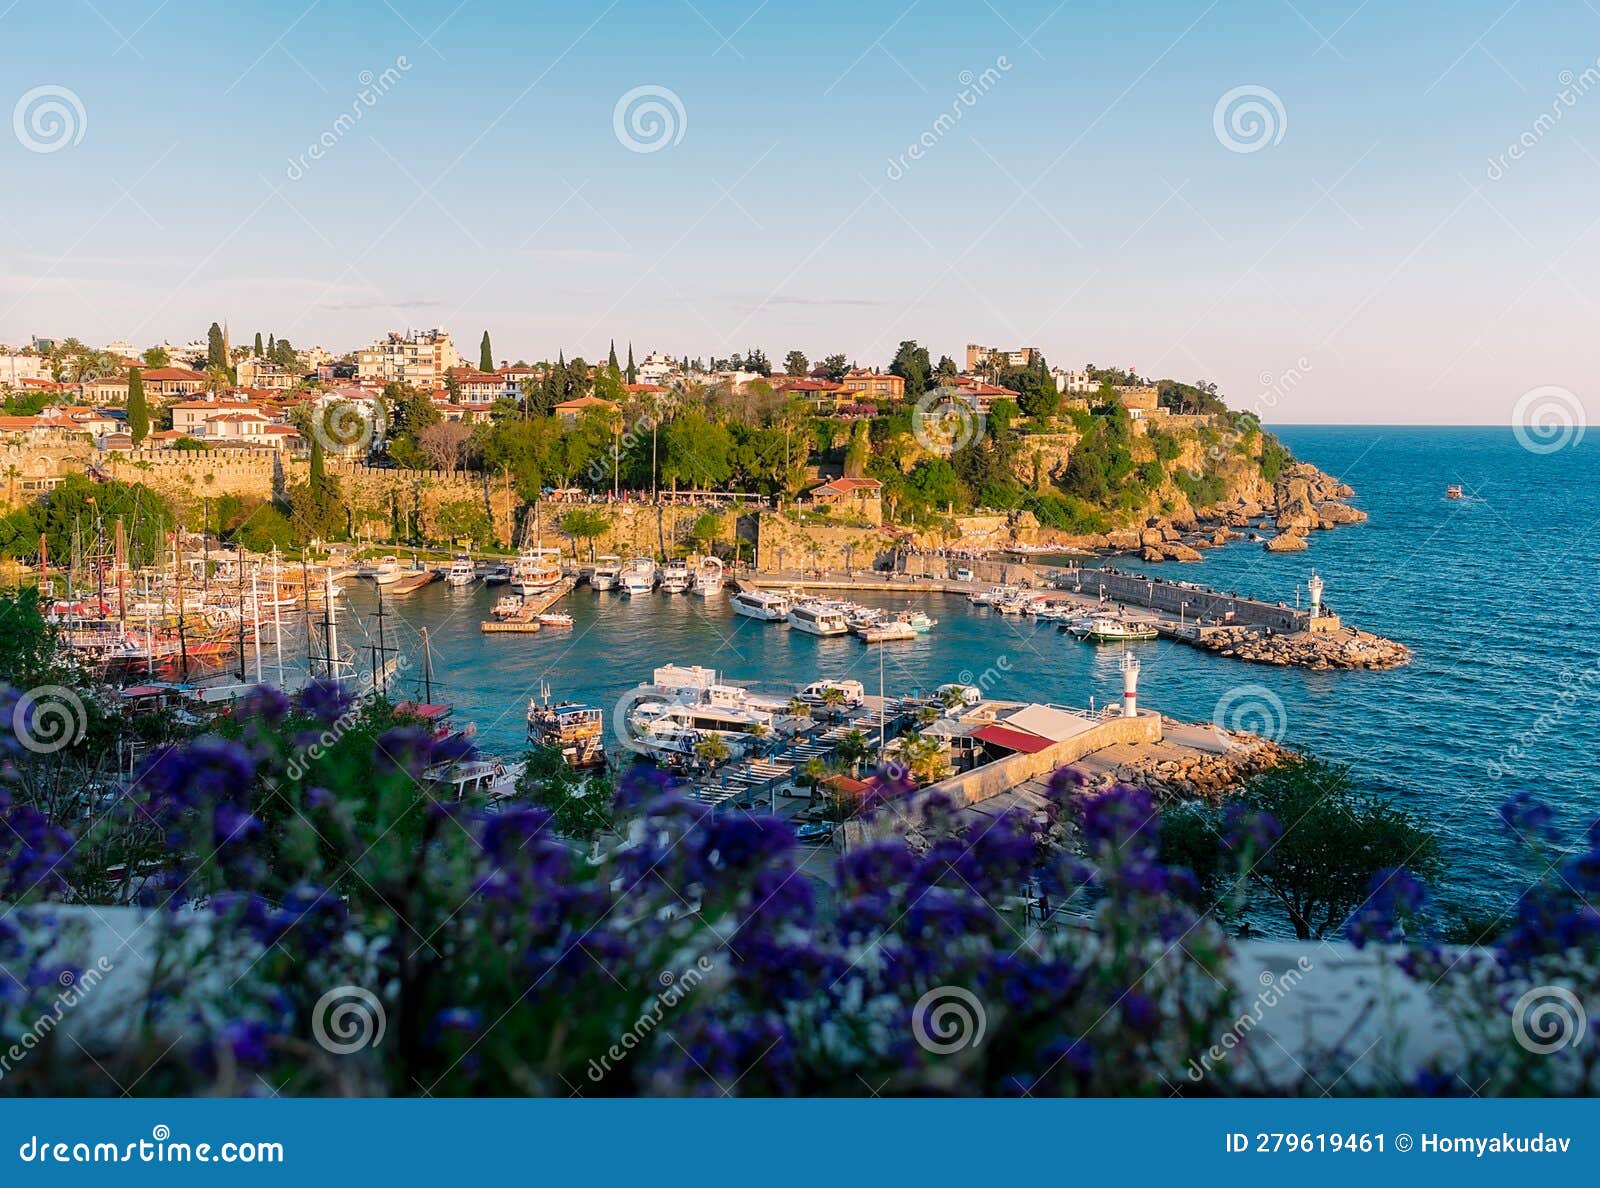 view from a height of the harbor near the old town of kaleichi in the turkish city of antalya.